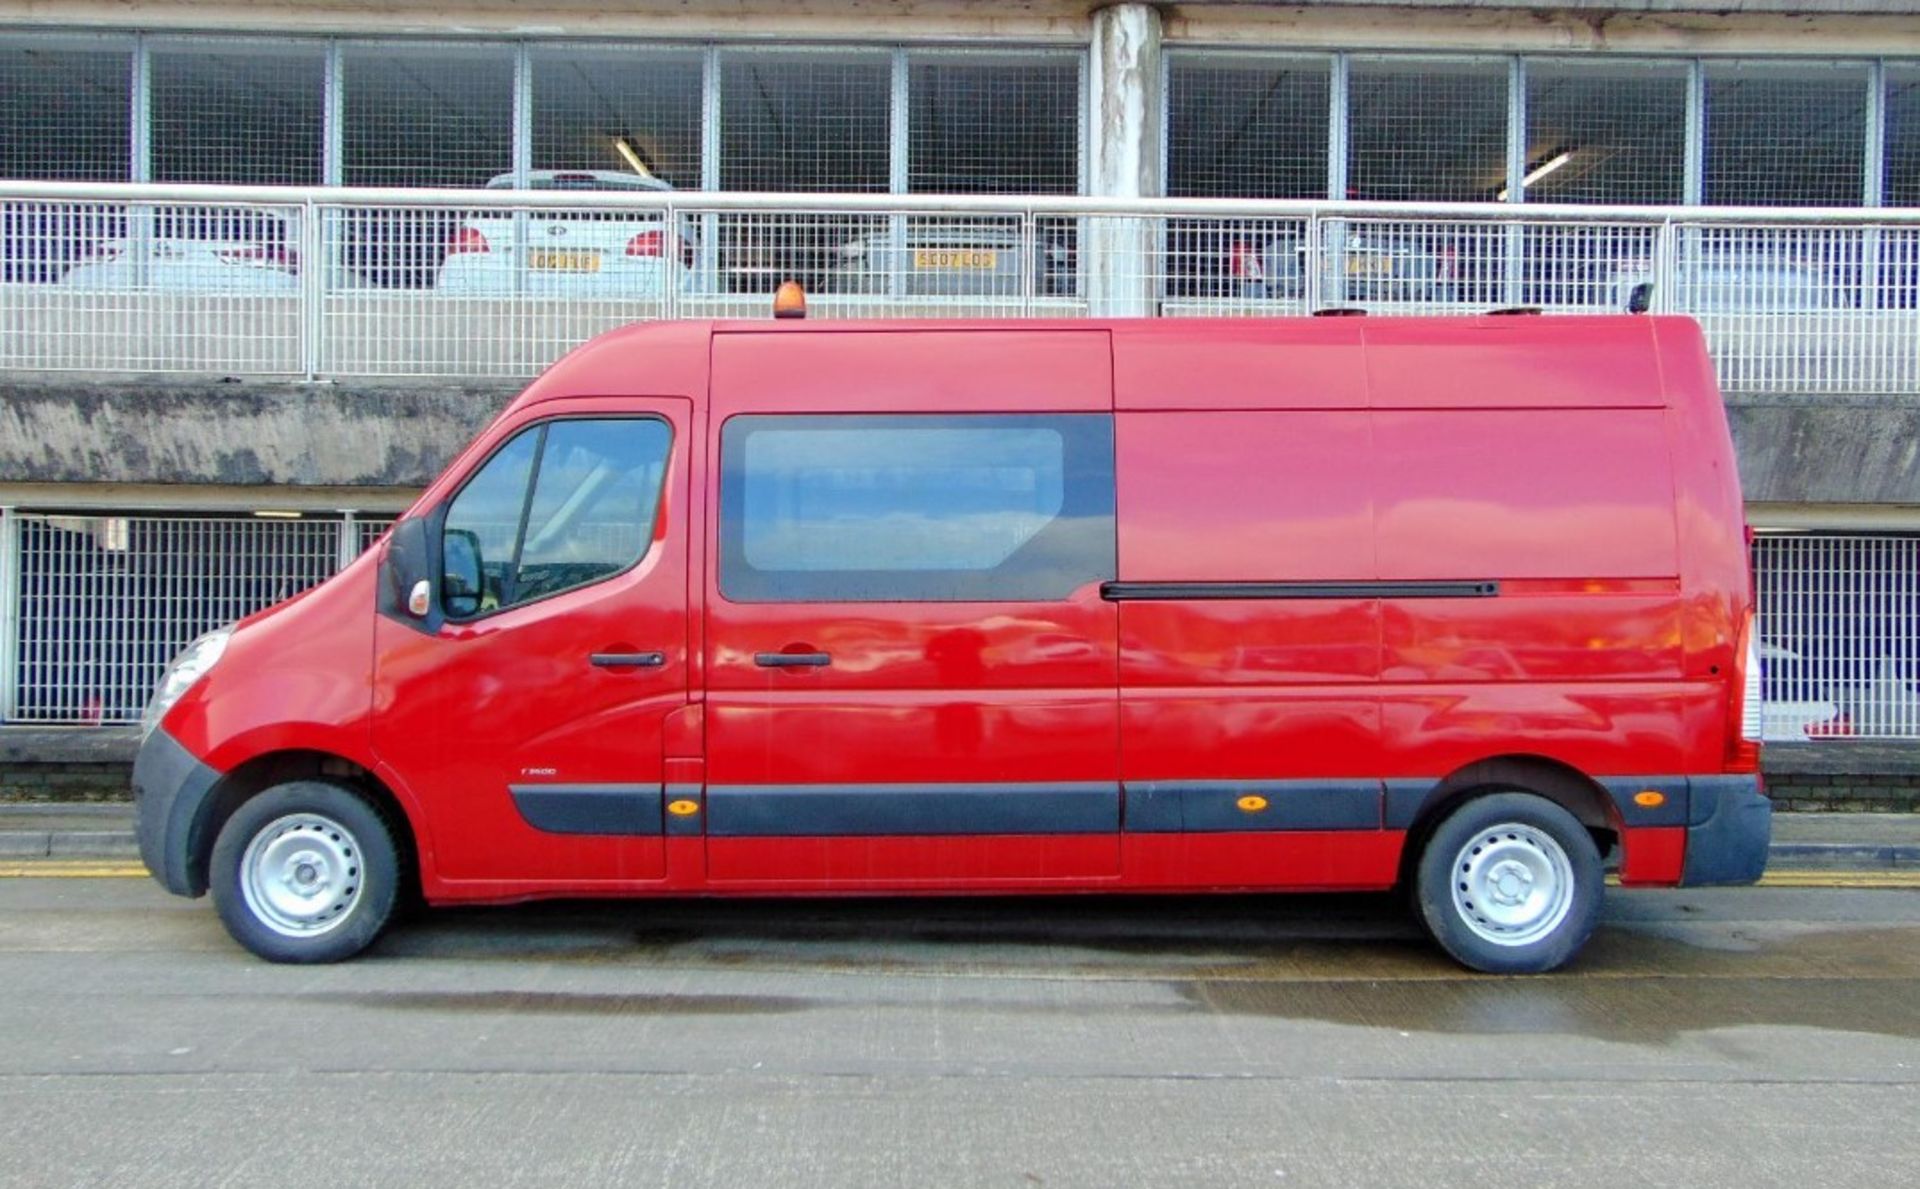 2014 VAUXHALL MOVANO LWB L3H2 WELFARE VAN - FULLY LOADED, READY FOR ANY JOB - Image 2 of 11